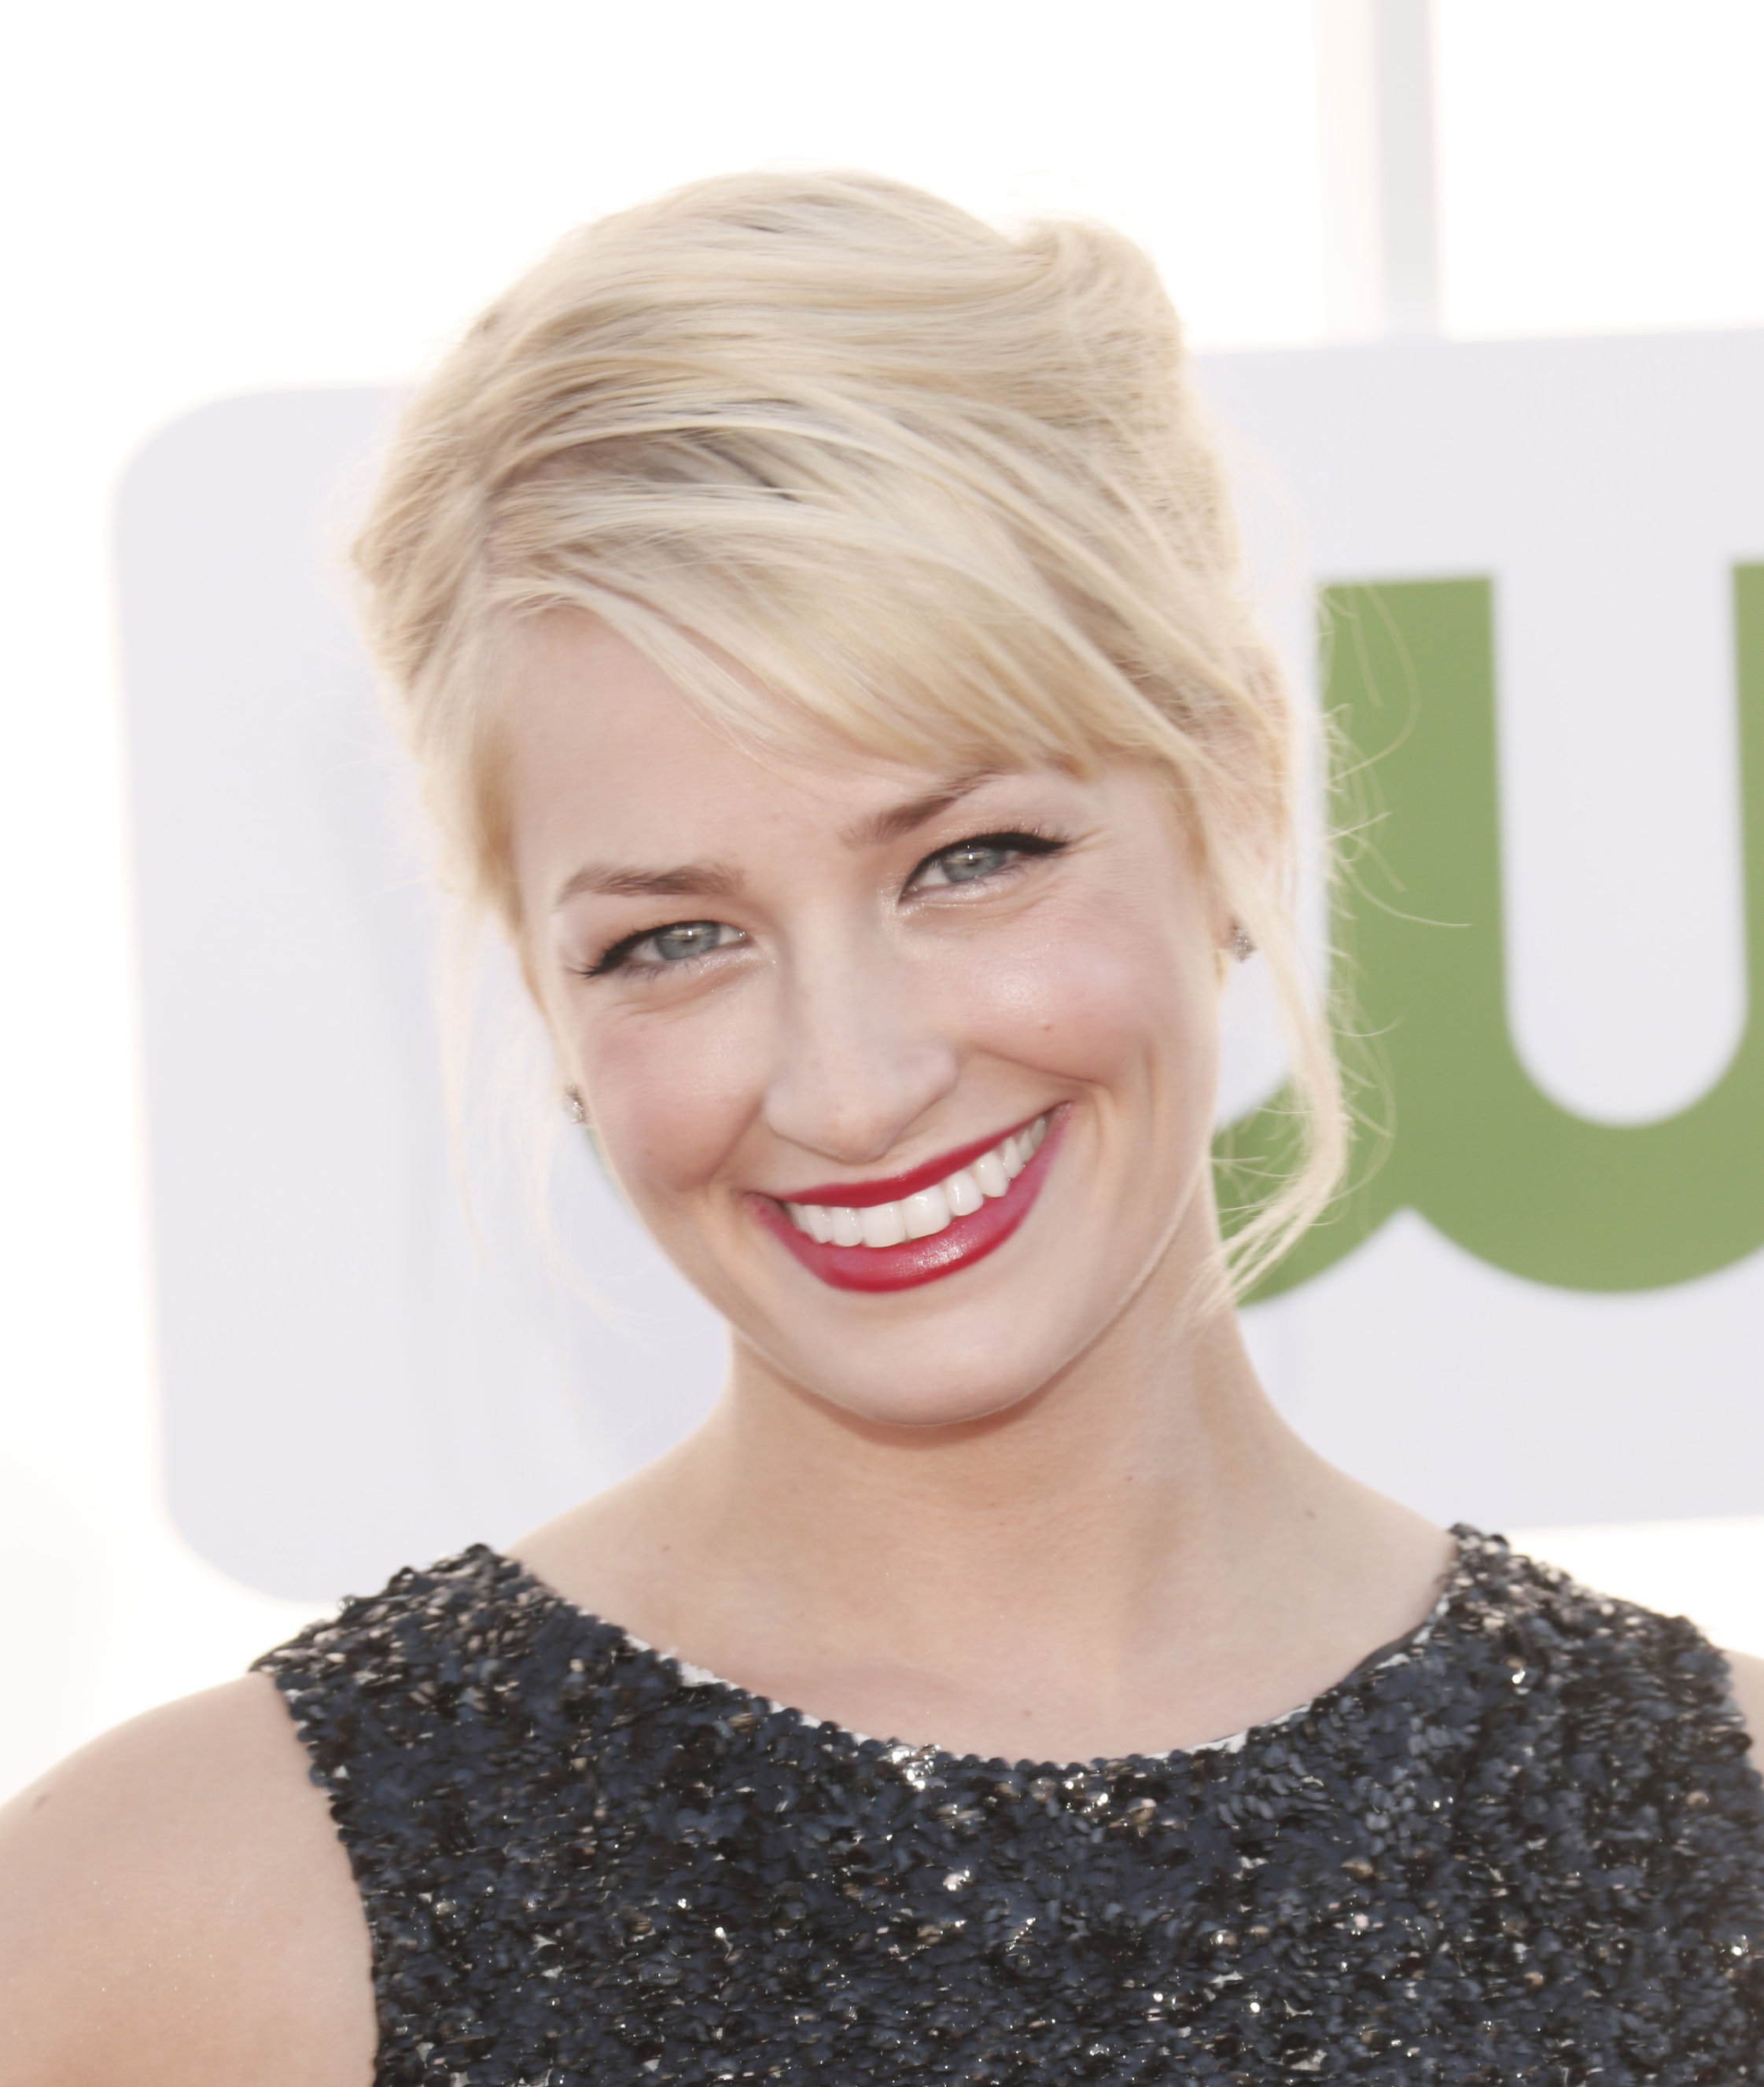 Beth Behrs Arrives At The 2012 Tca Summer Tour Cbs Showtime And The